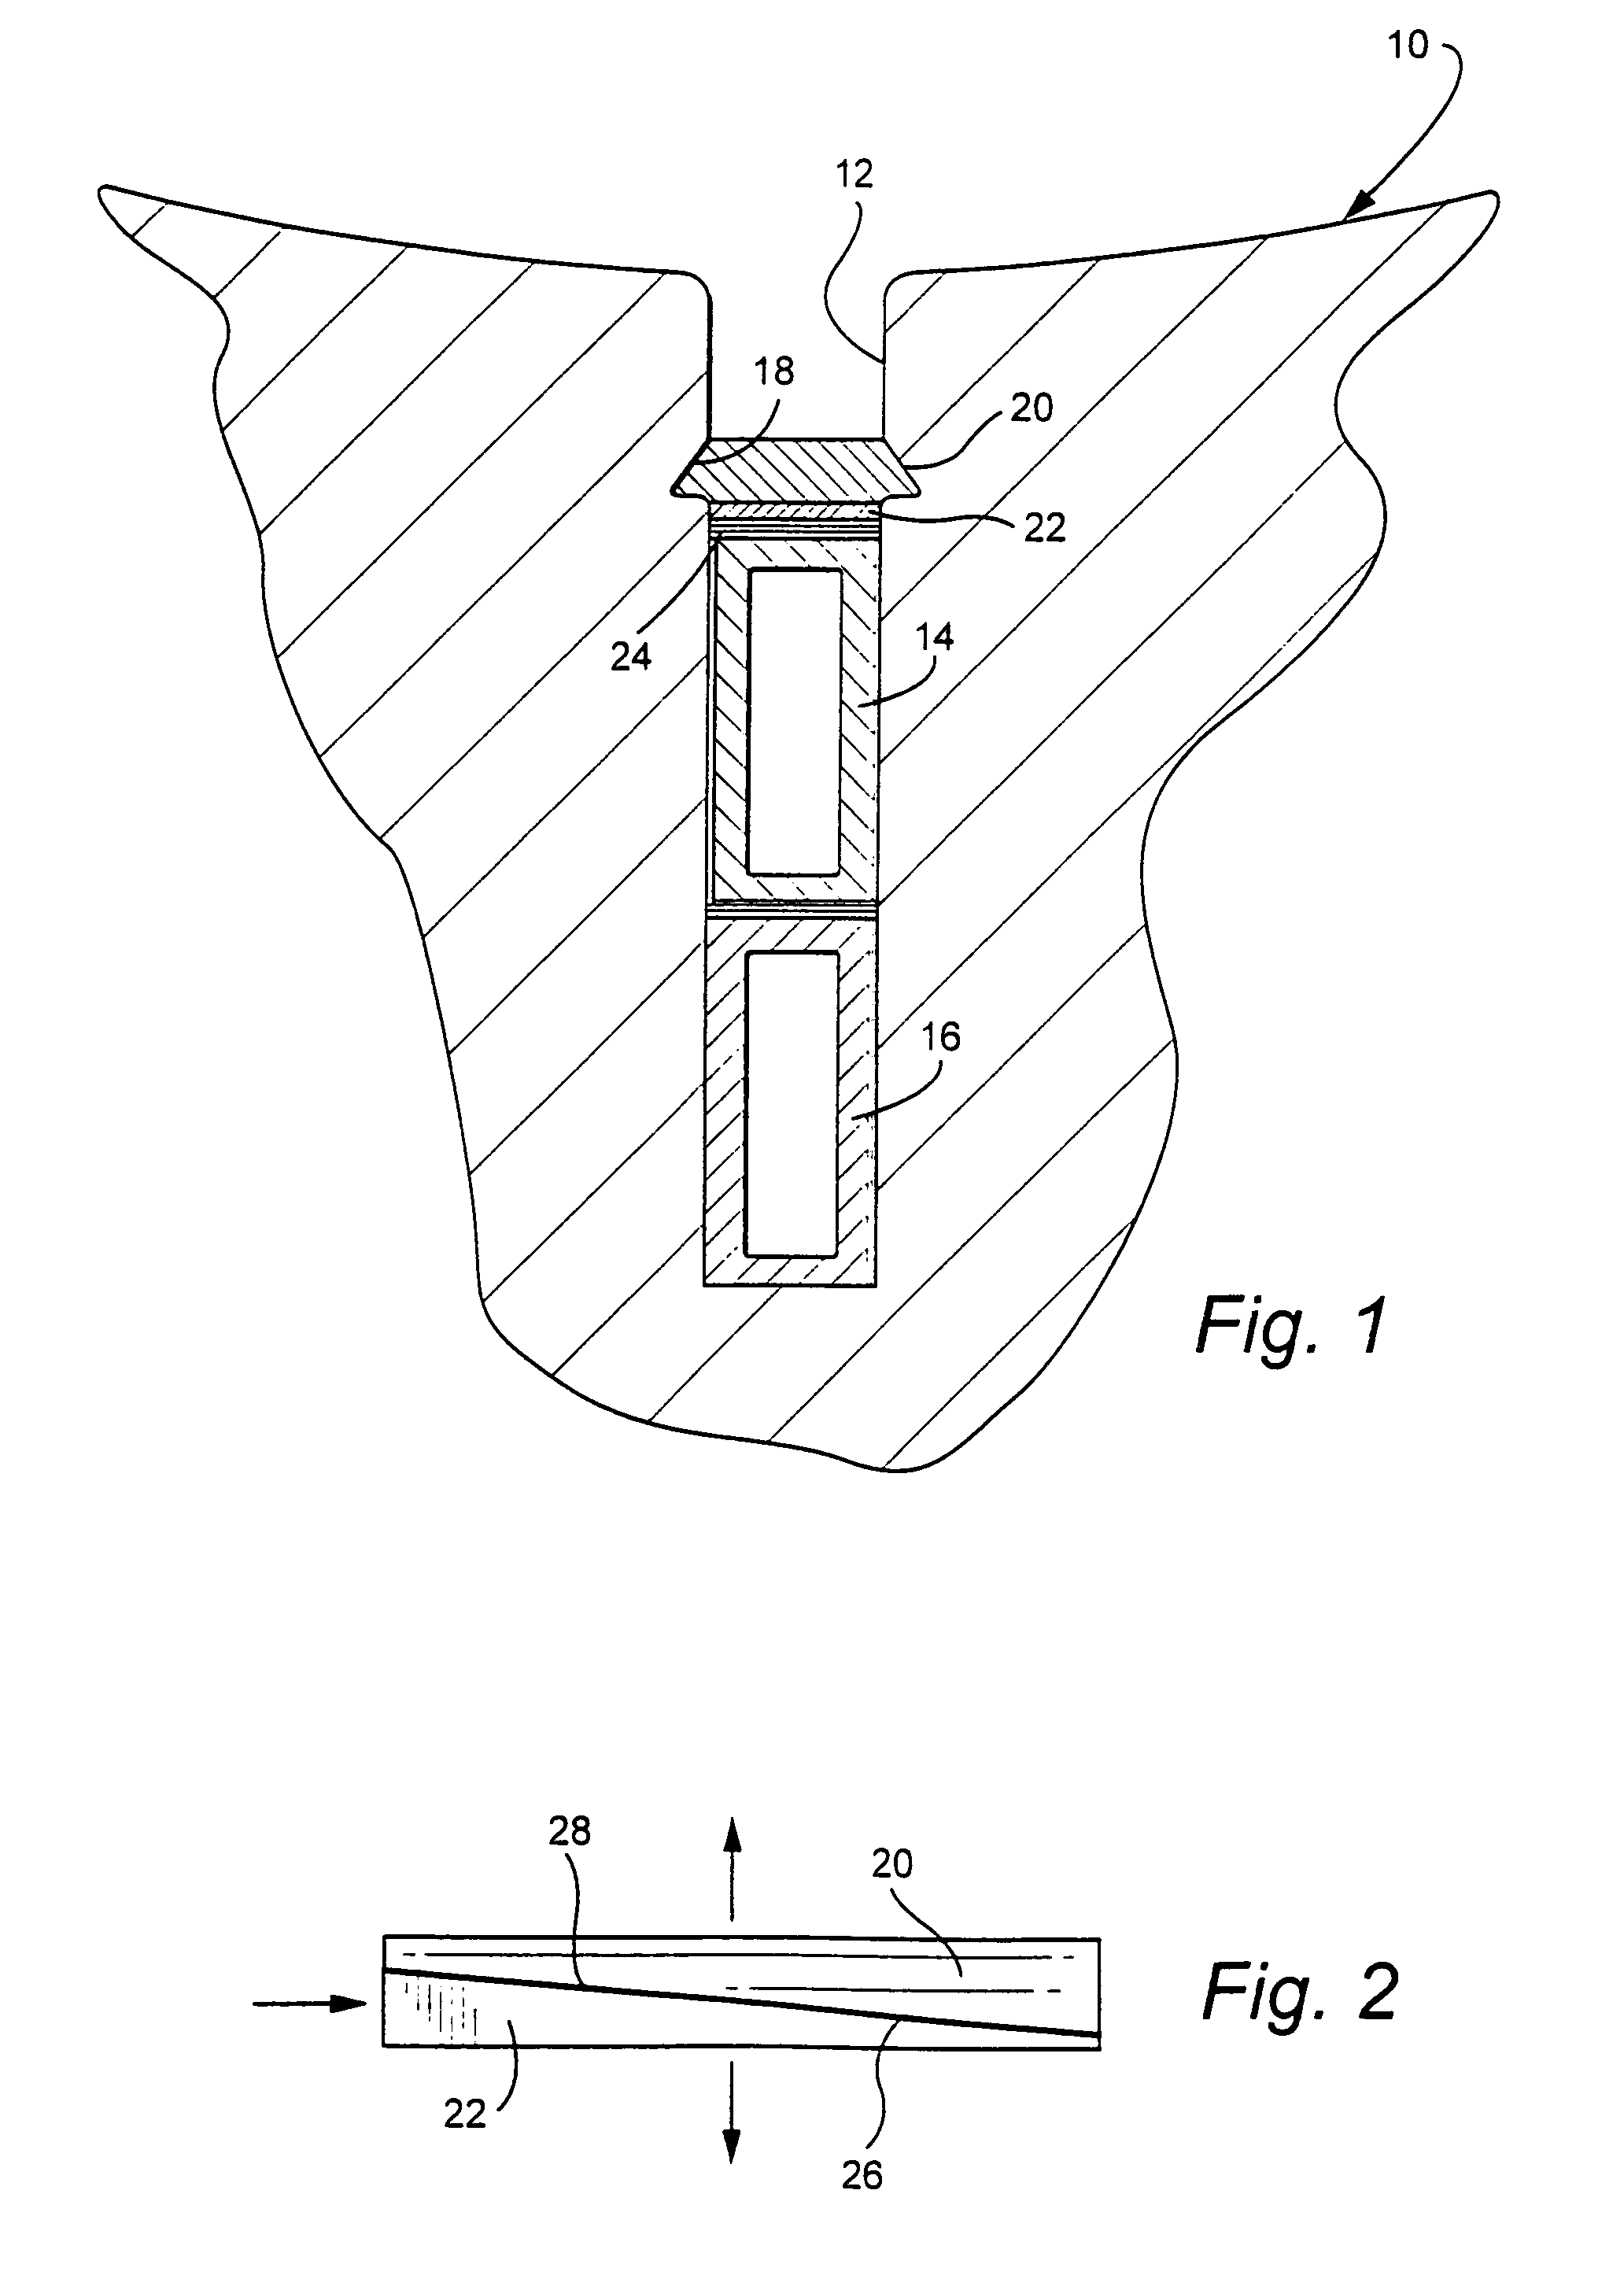 Re-tightenable stator body wedge system